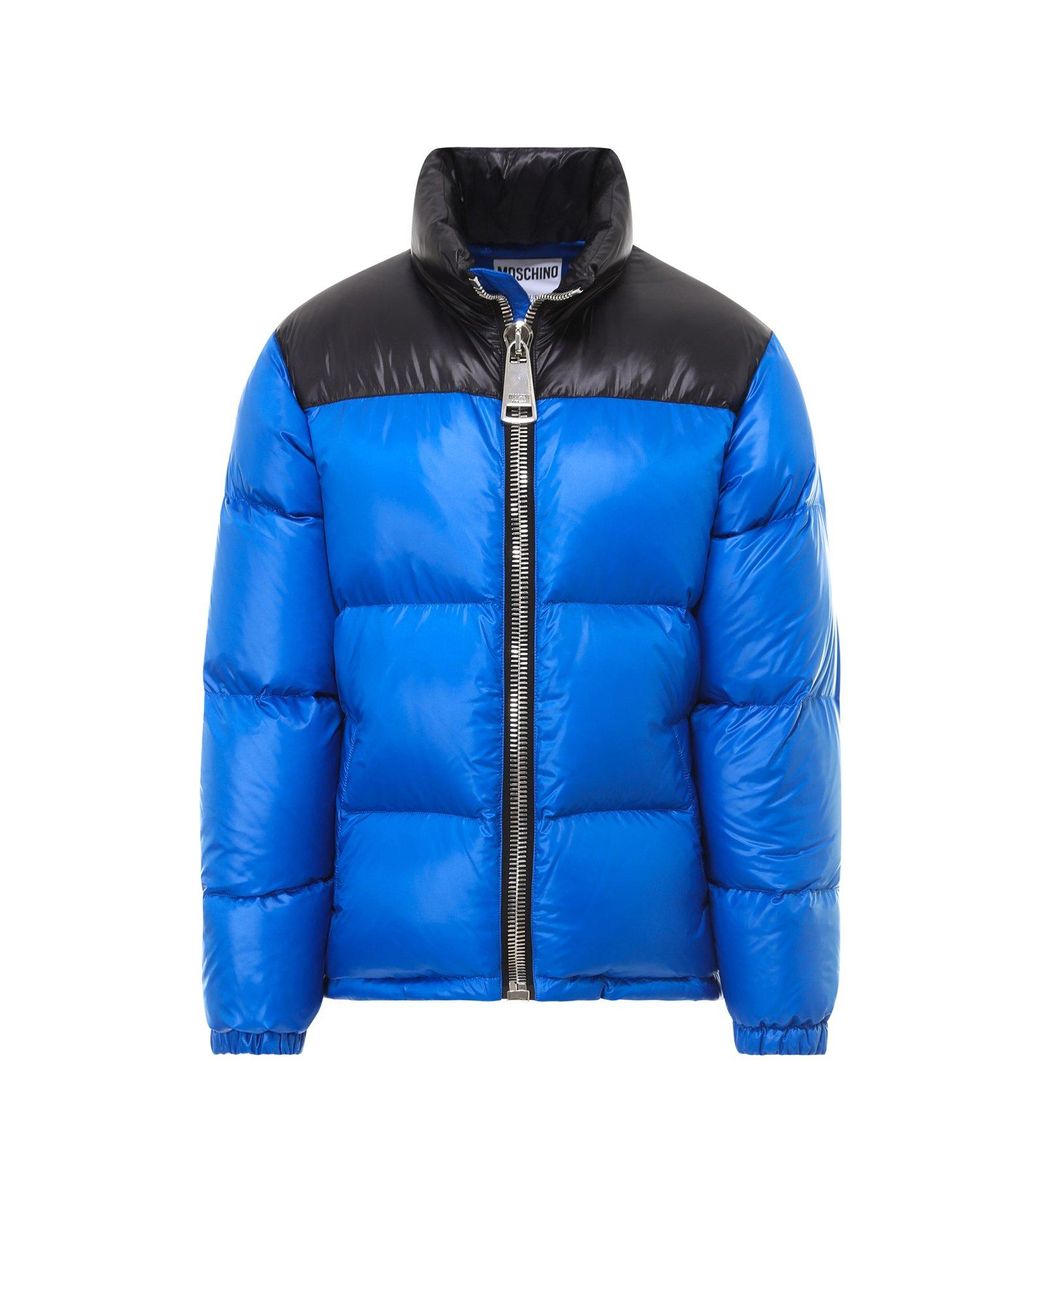 Moschino Synthetic Logo Puffer Jacket in Blue for Men - Lyst